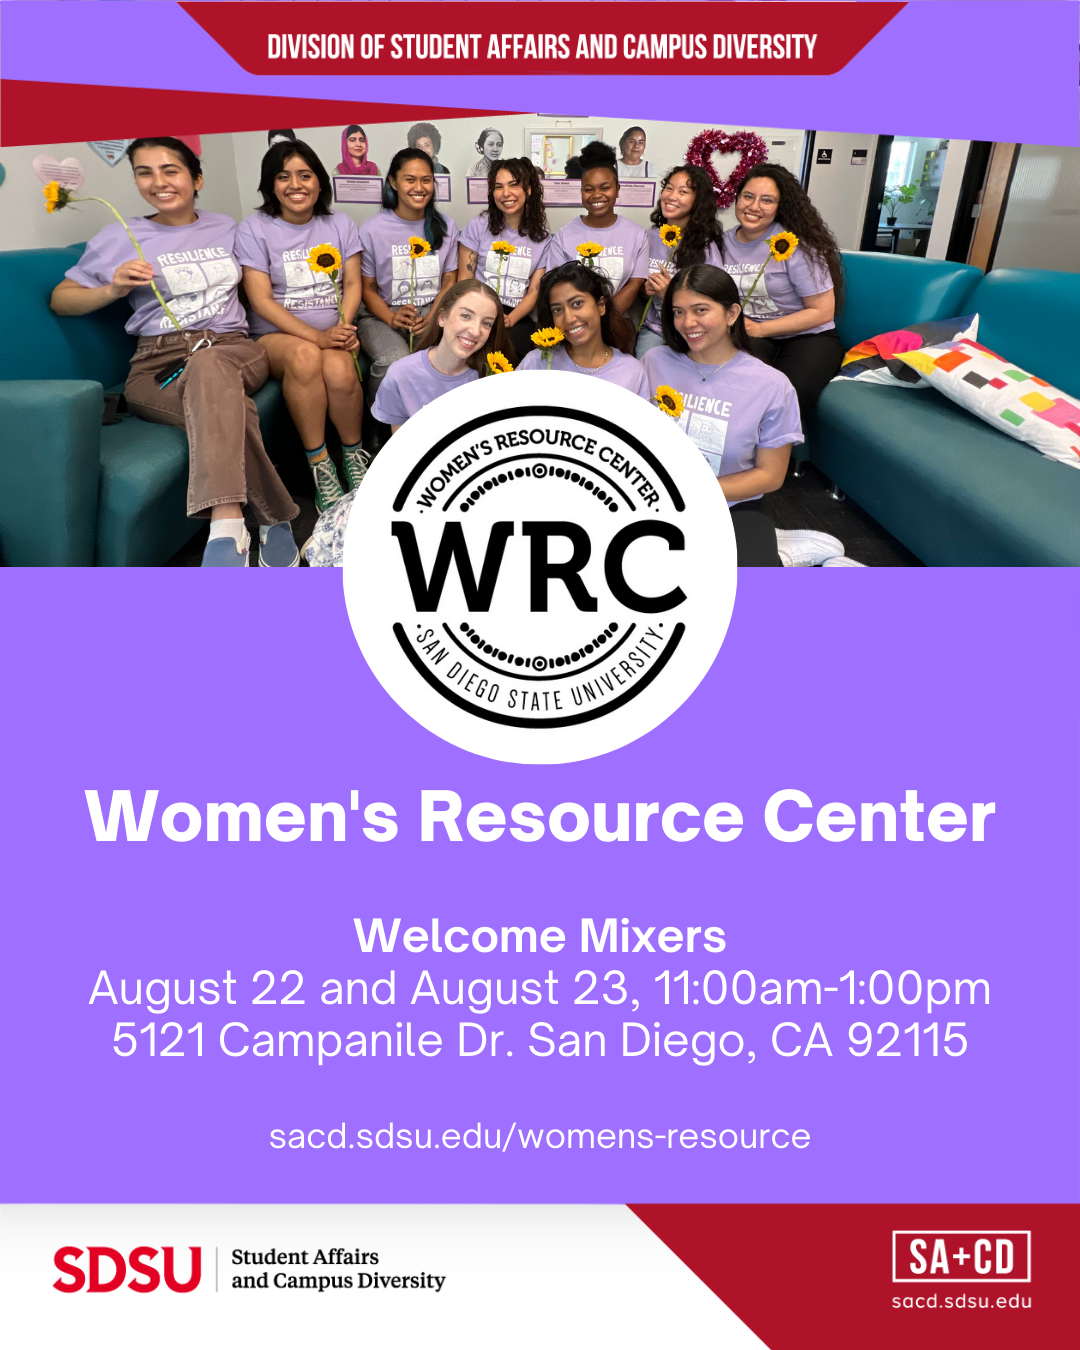 Women's Resource Center Welcome Mixer Aug 22 & 23, 11 a.m. - 1 p.m. at The WRC